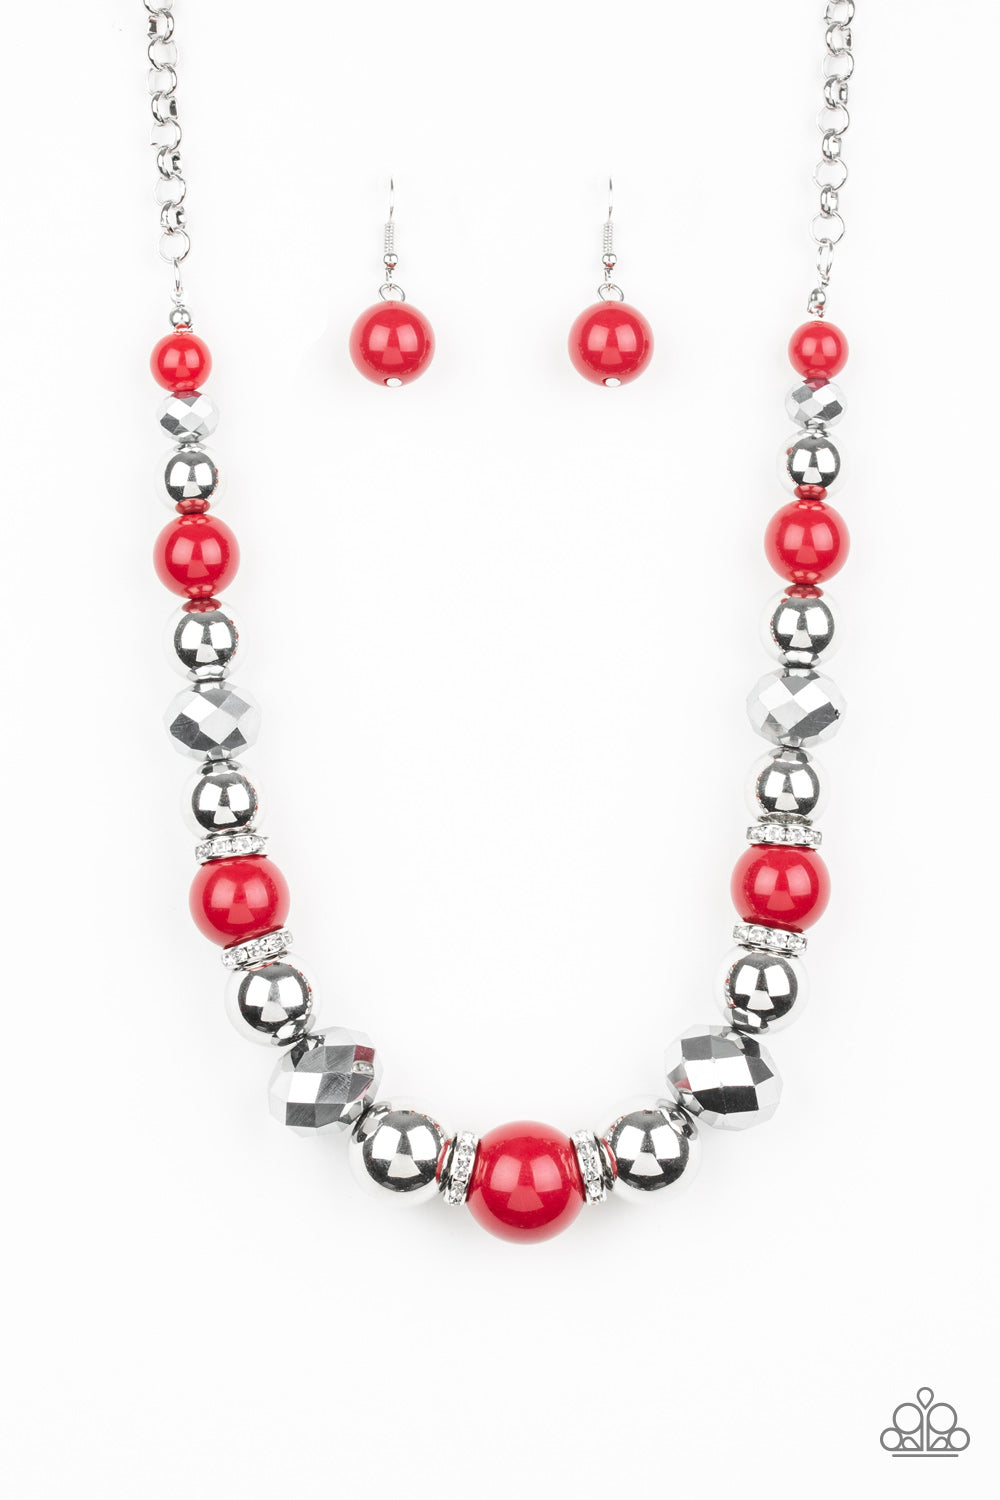 Weekend Party Necklace__Red